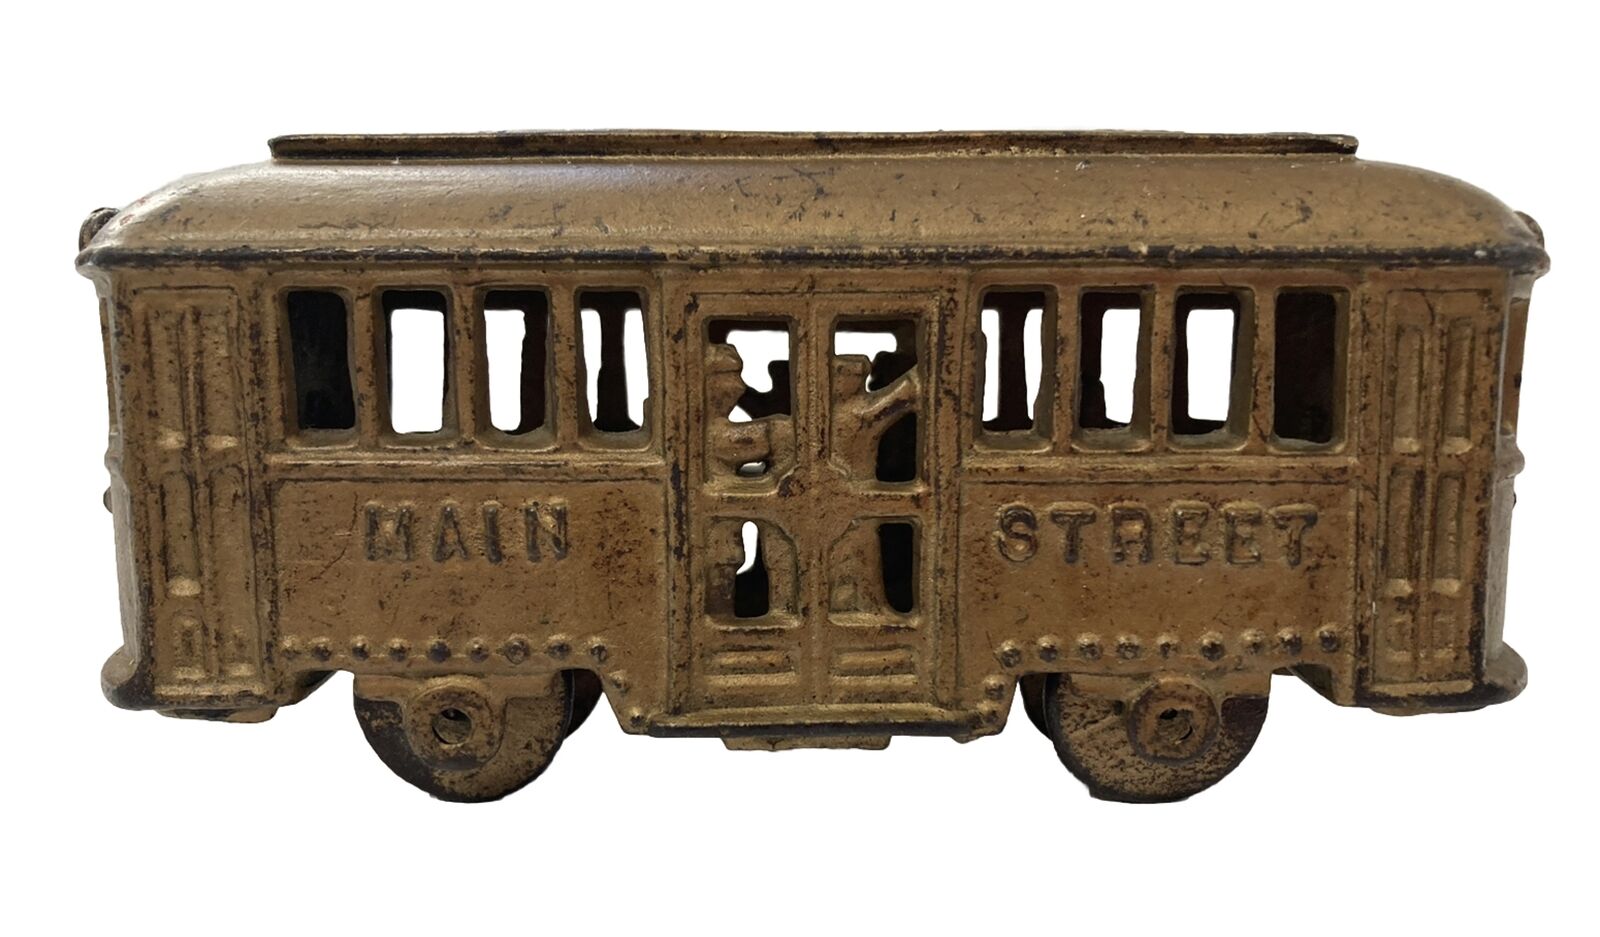 A. C. Williams Main Street trolley car cast iron bank Rare Without Passengers